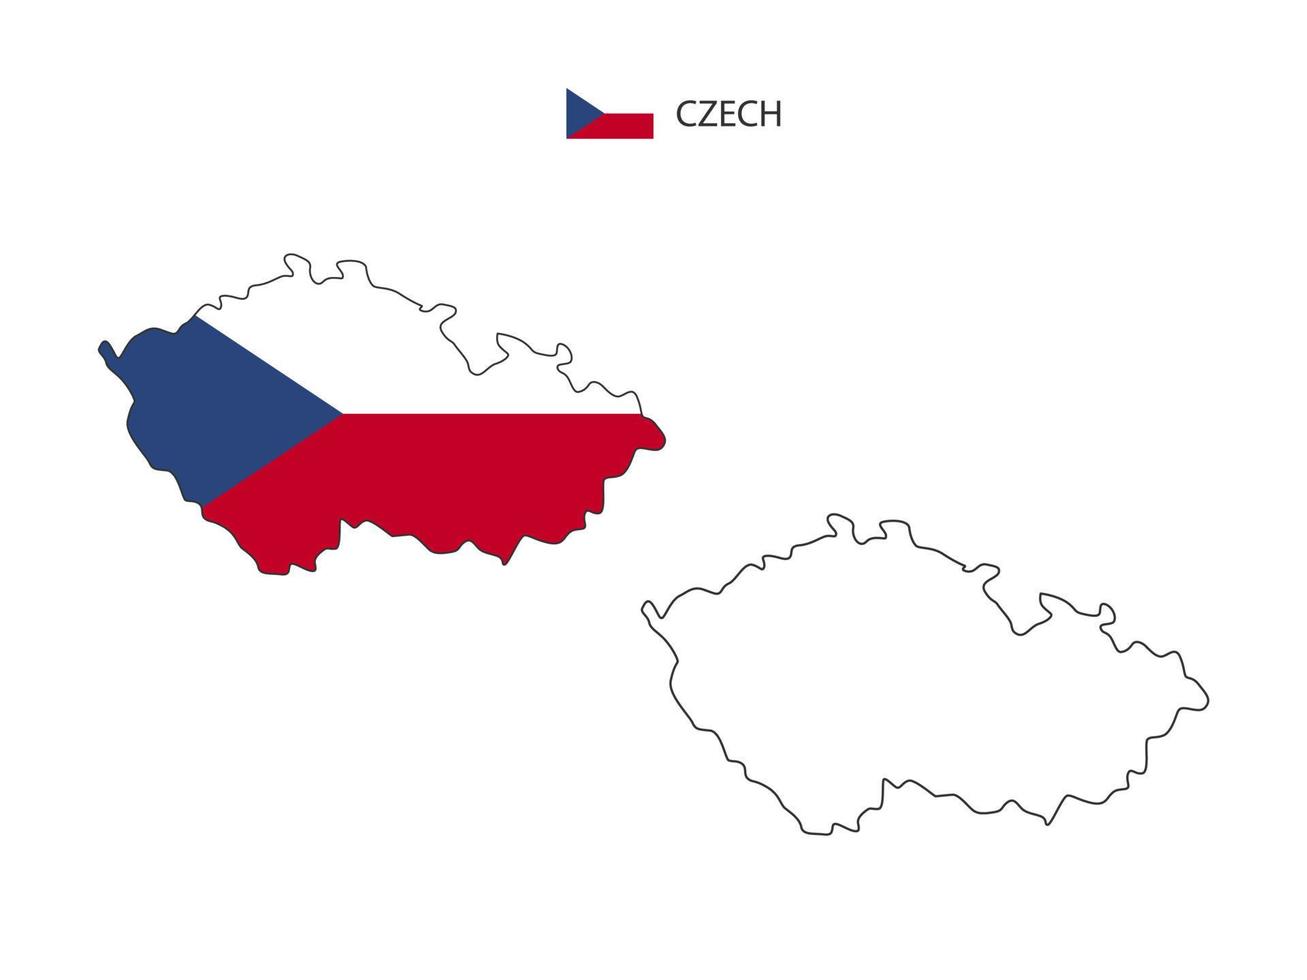 Czech map city vector divided by outline simplicity style. Have 2 versions, black thin line version and color of country flag version. Both map were on the white background.